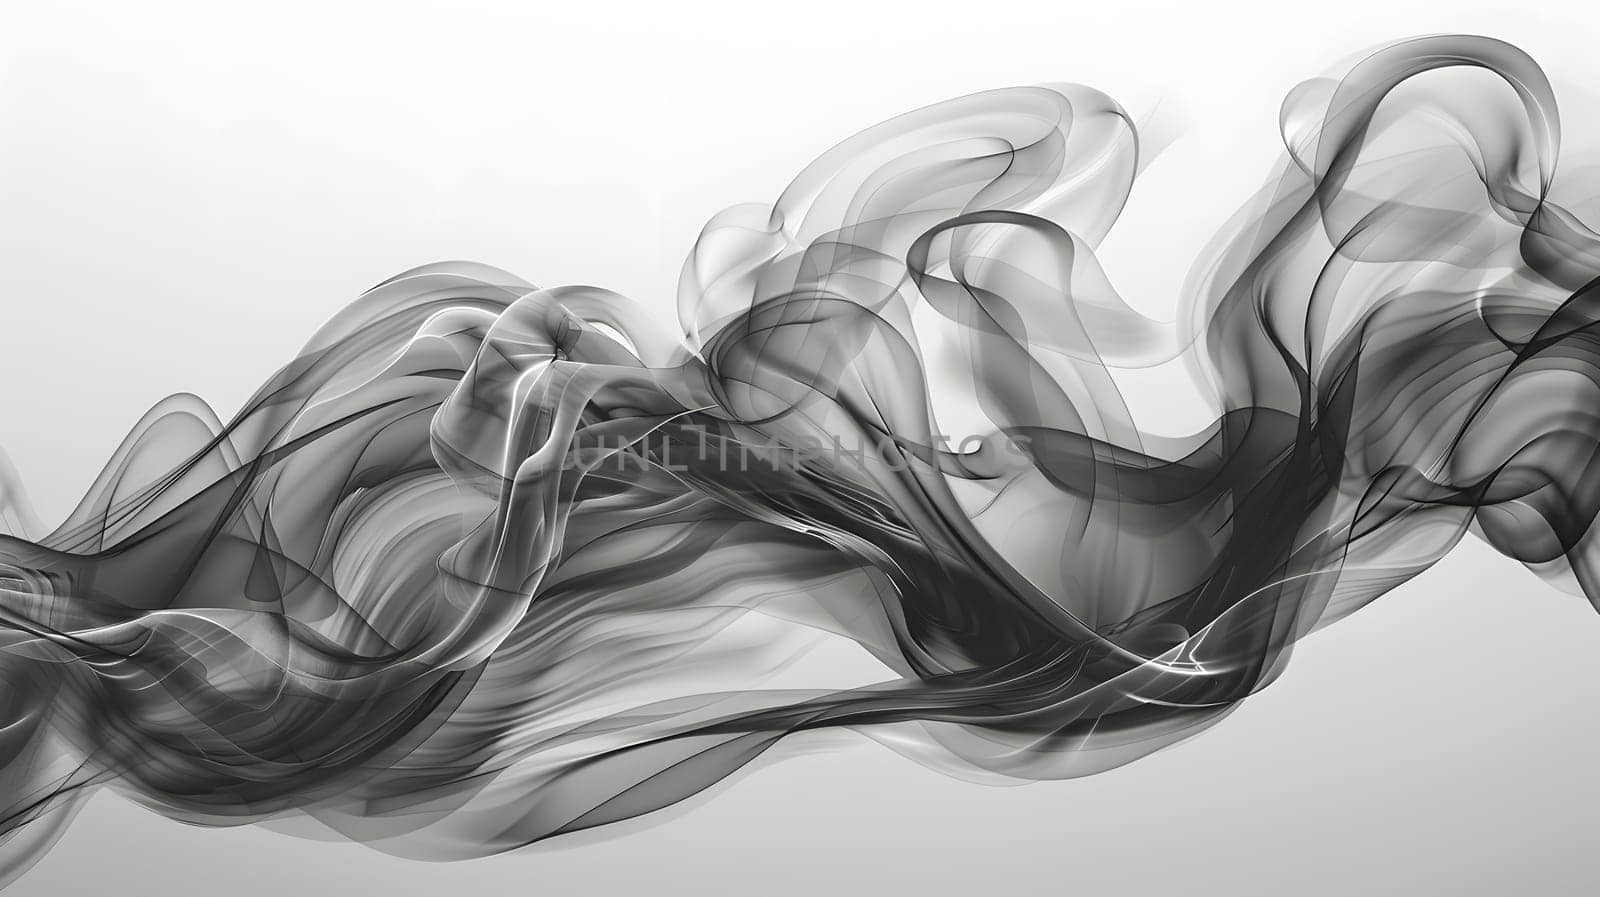 A grayscale photo captures the elegant gesture of smoke on a clean white background, resembling a painting or illustration with automotive design influences